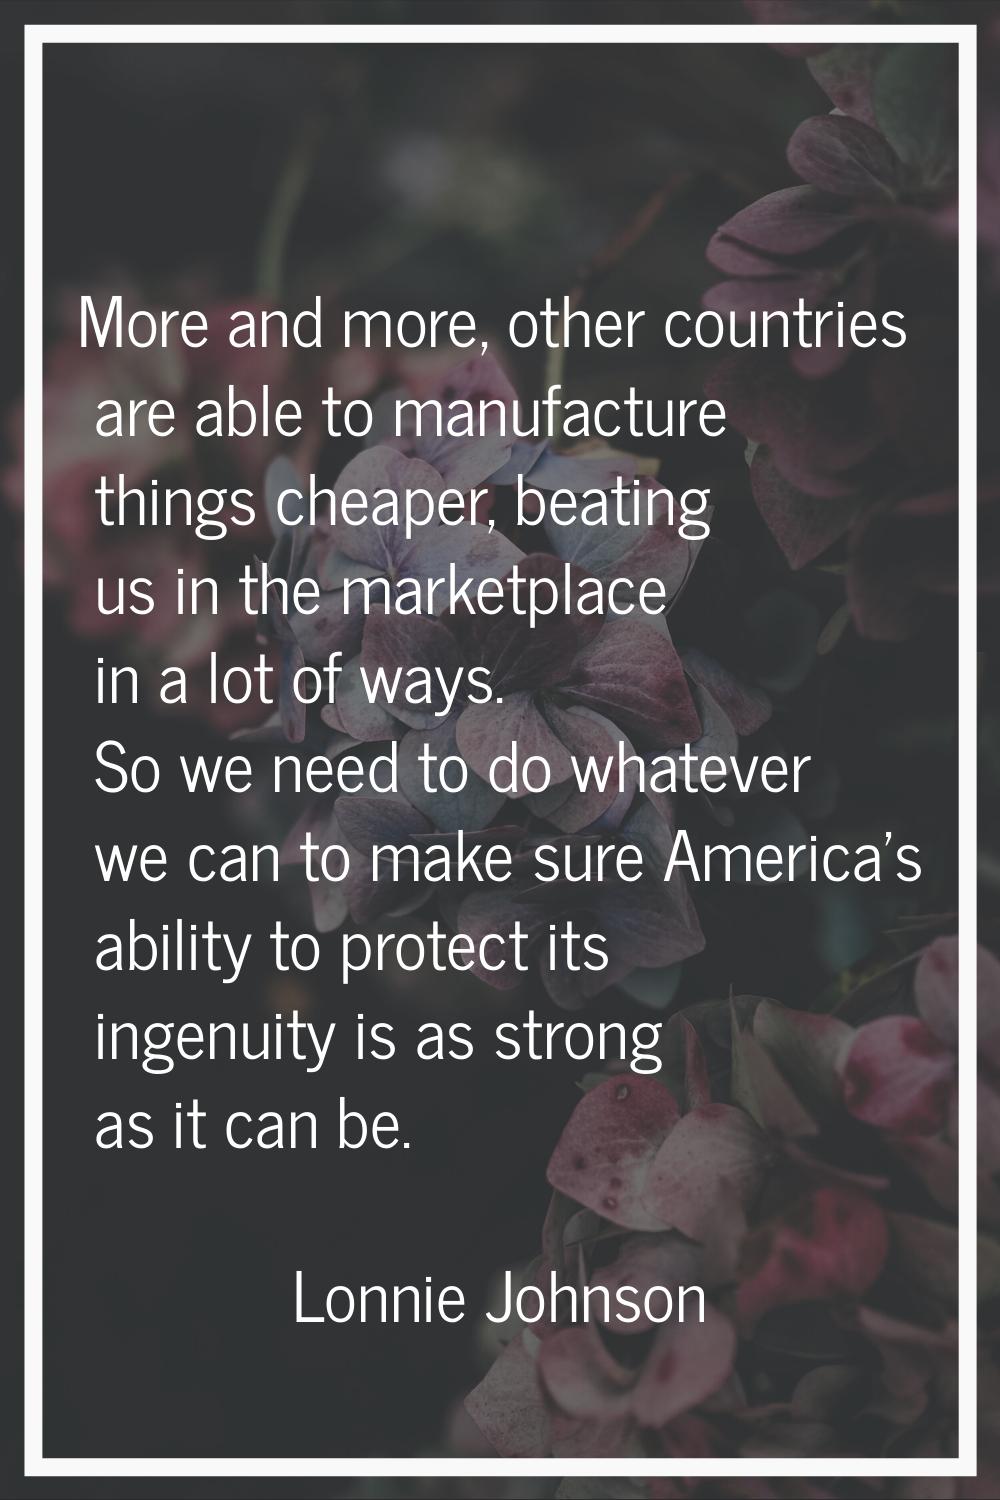 More and more, other countries are able to manufacture things cheaper, beating us in the marketplac